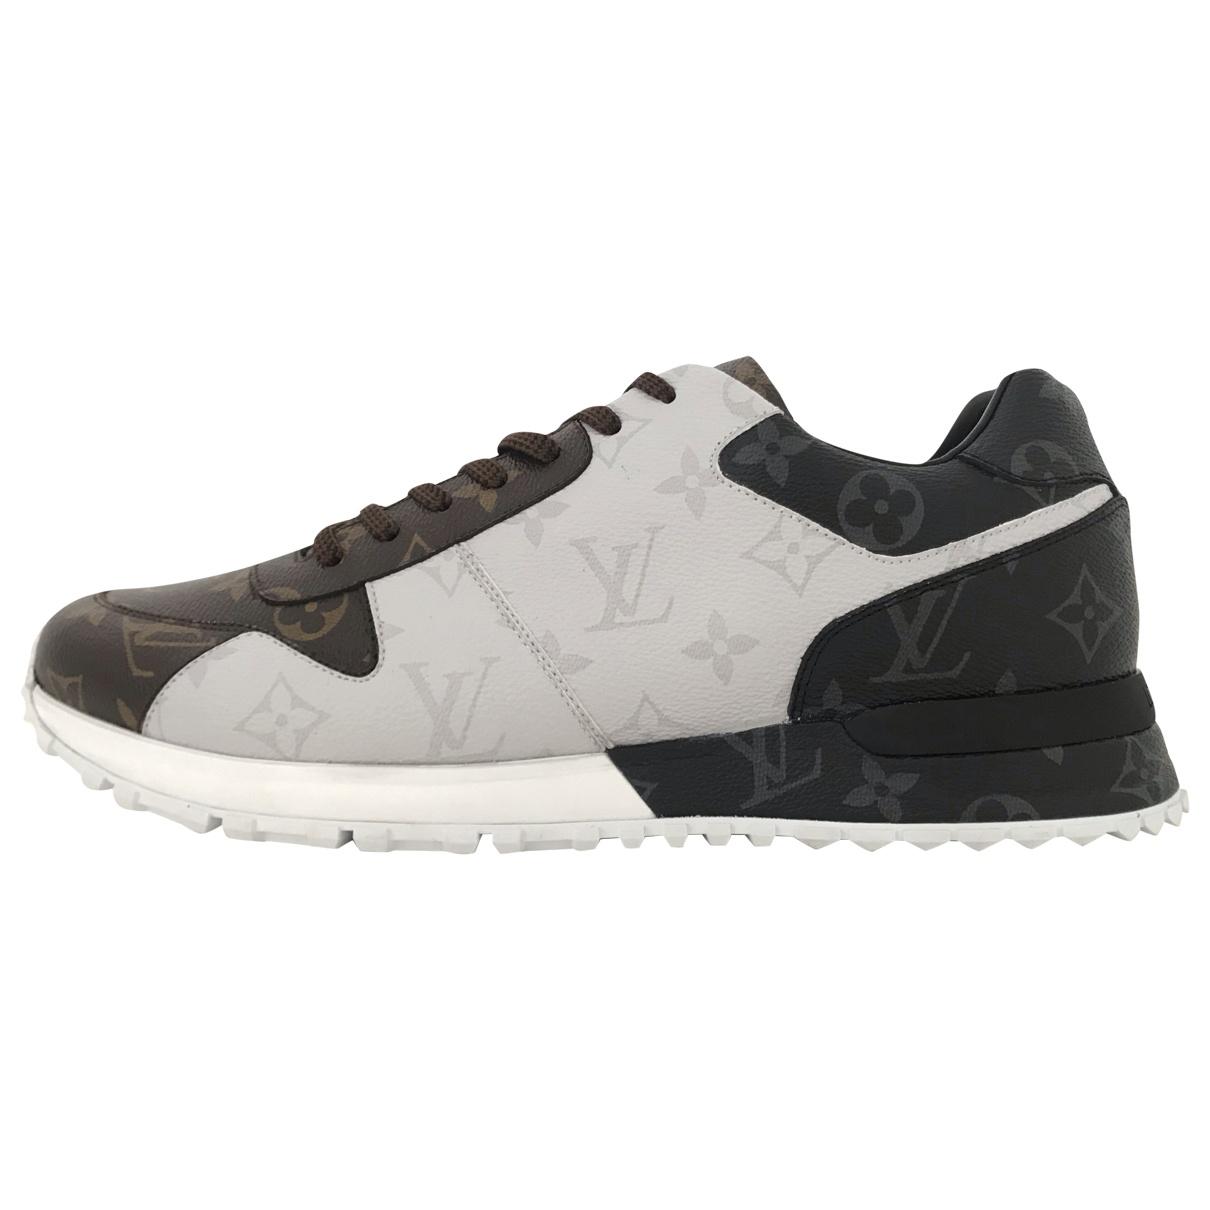 Louis Vuitton Run Away Leather Trainers in Black for Men - Lyst